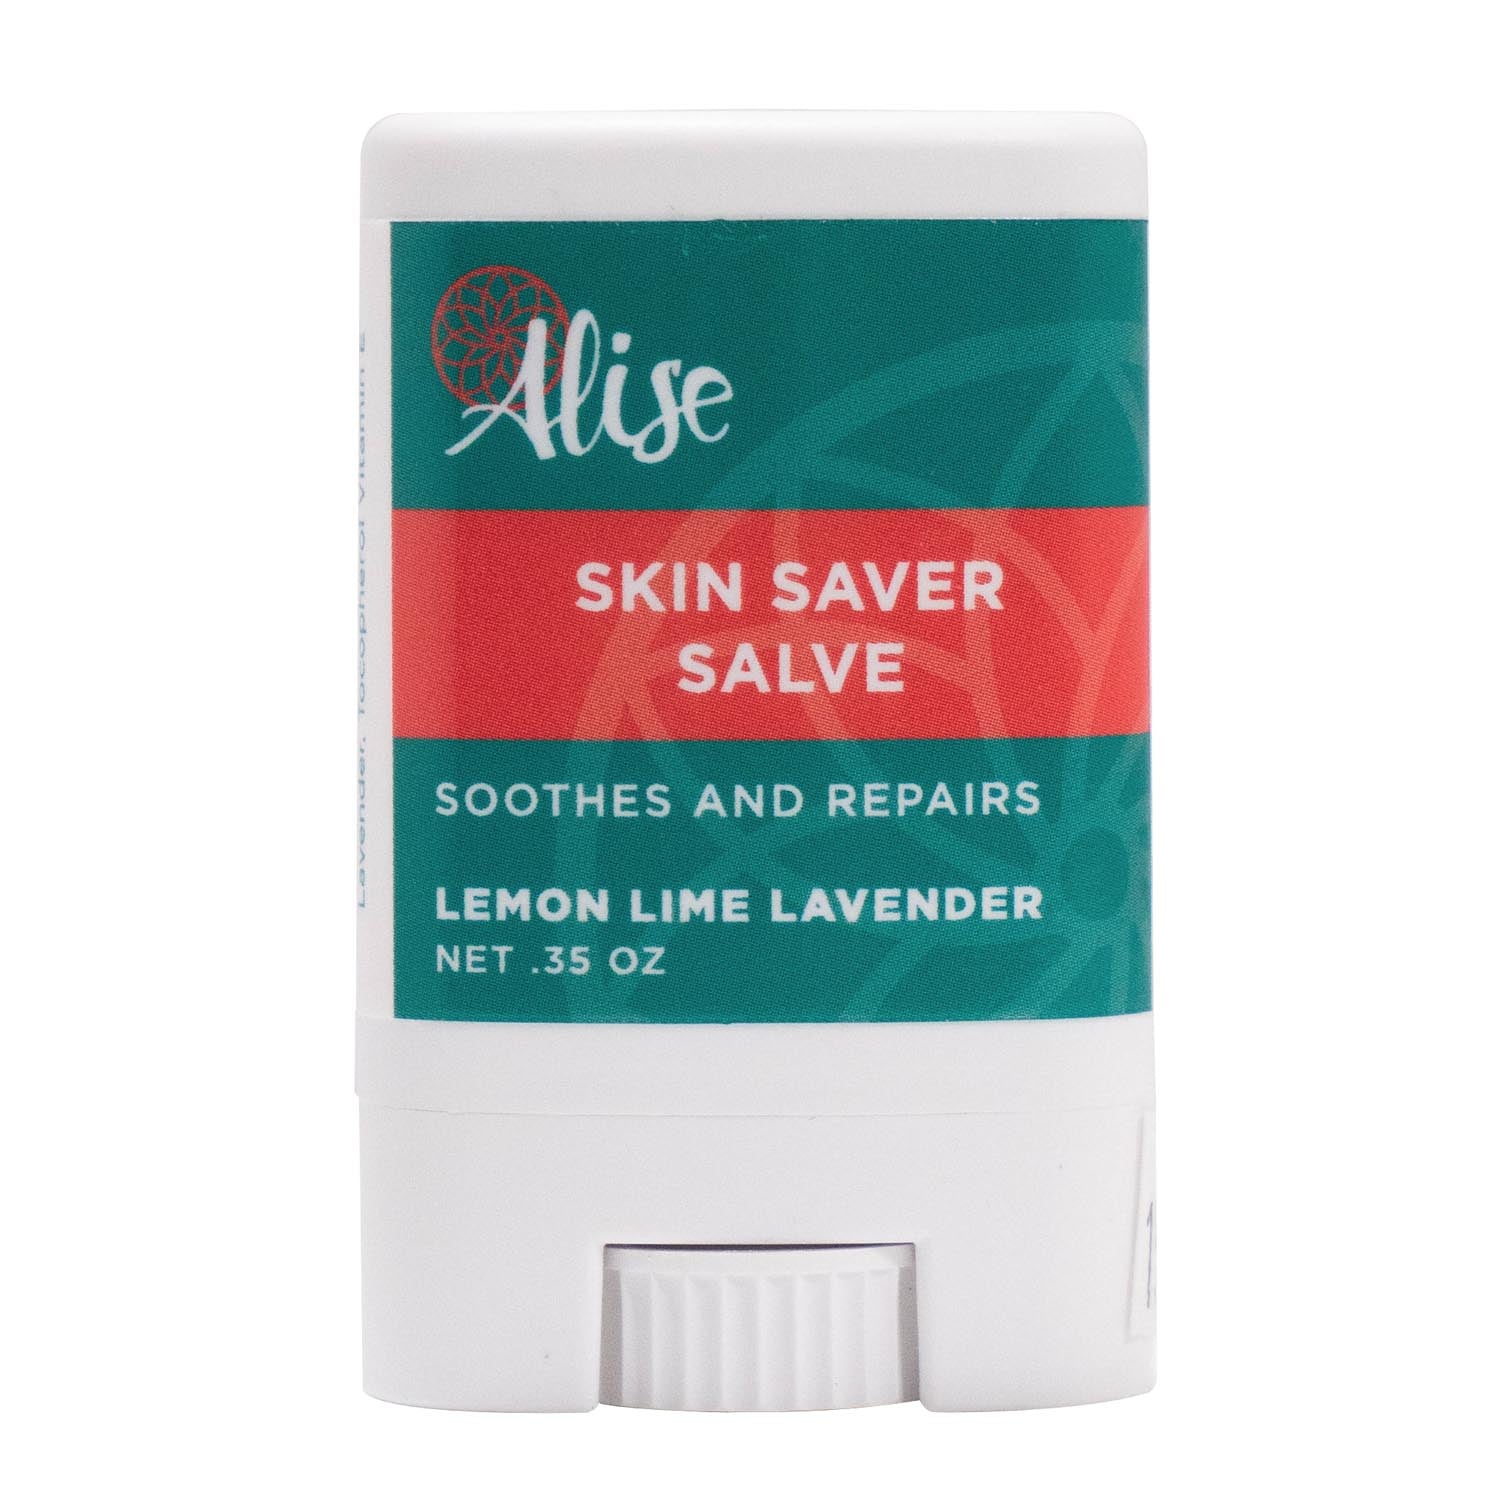 Skin Saver Salve .35oz handcrafted by Alise Body Care